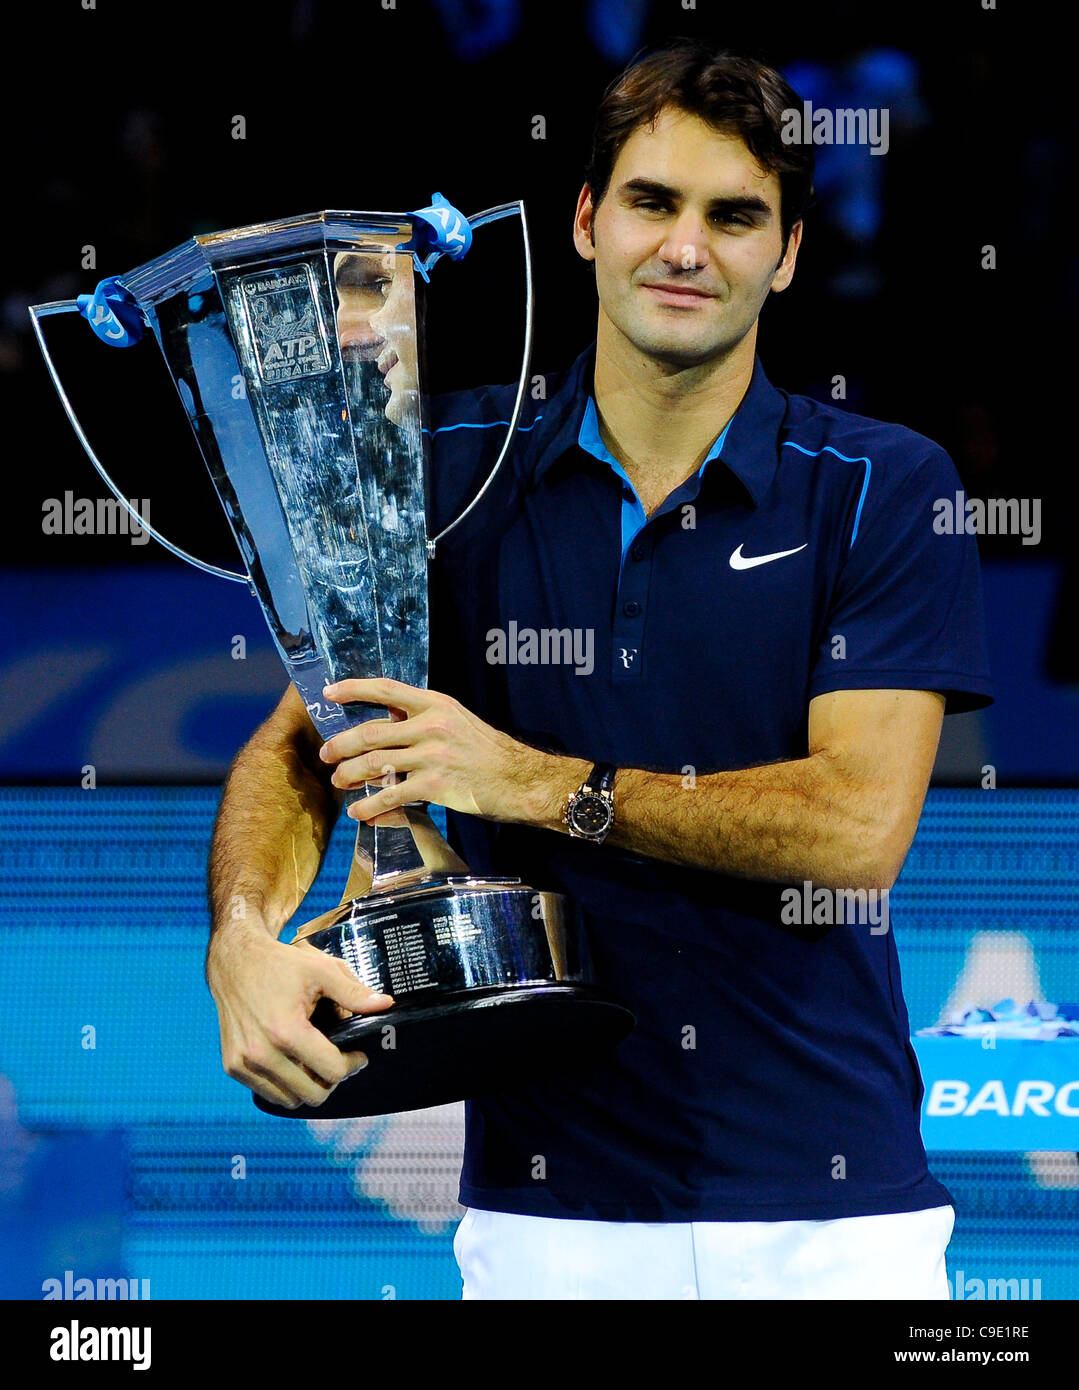 27.11.2011 London, England. [4] Roger Federer (SUI) poses with his Champion  trophy after beating [7] Jo-Wilfried Tsonga (FRA) by two sets to one in the  Final of the Barclays ATP World Tour